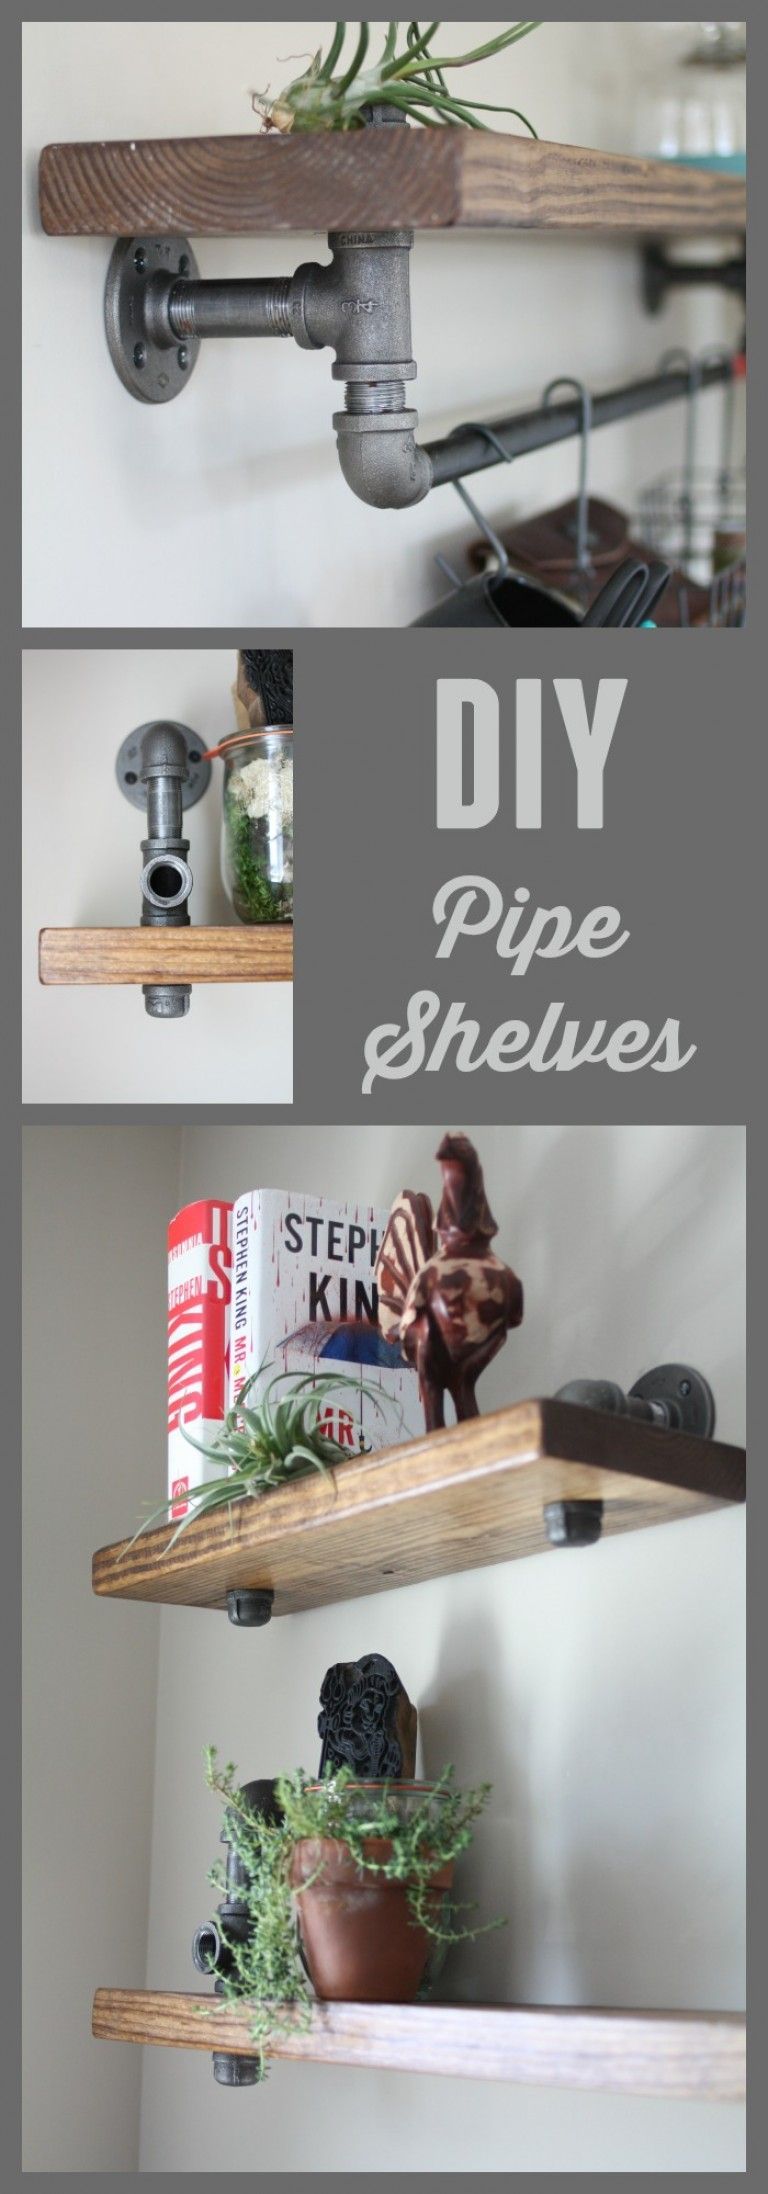 How to make diy industrial shelves from black iron pipe.